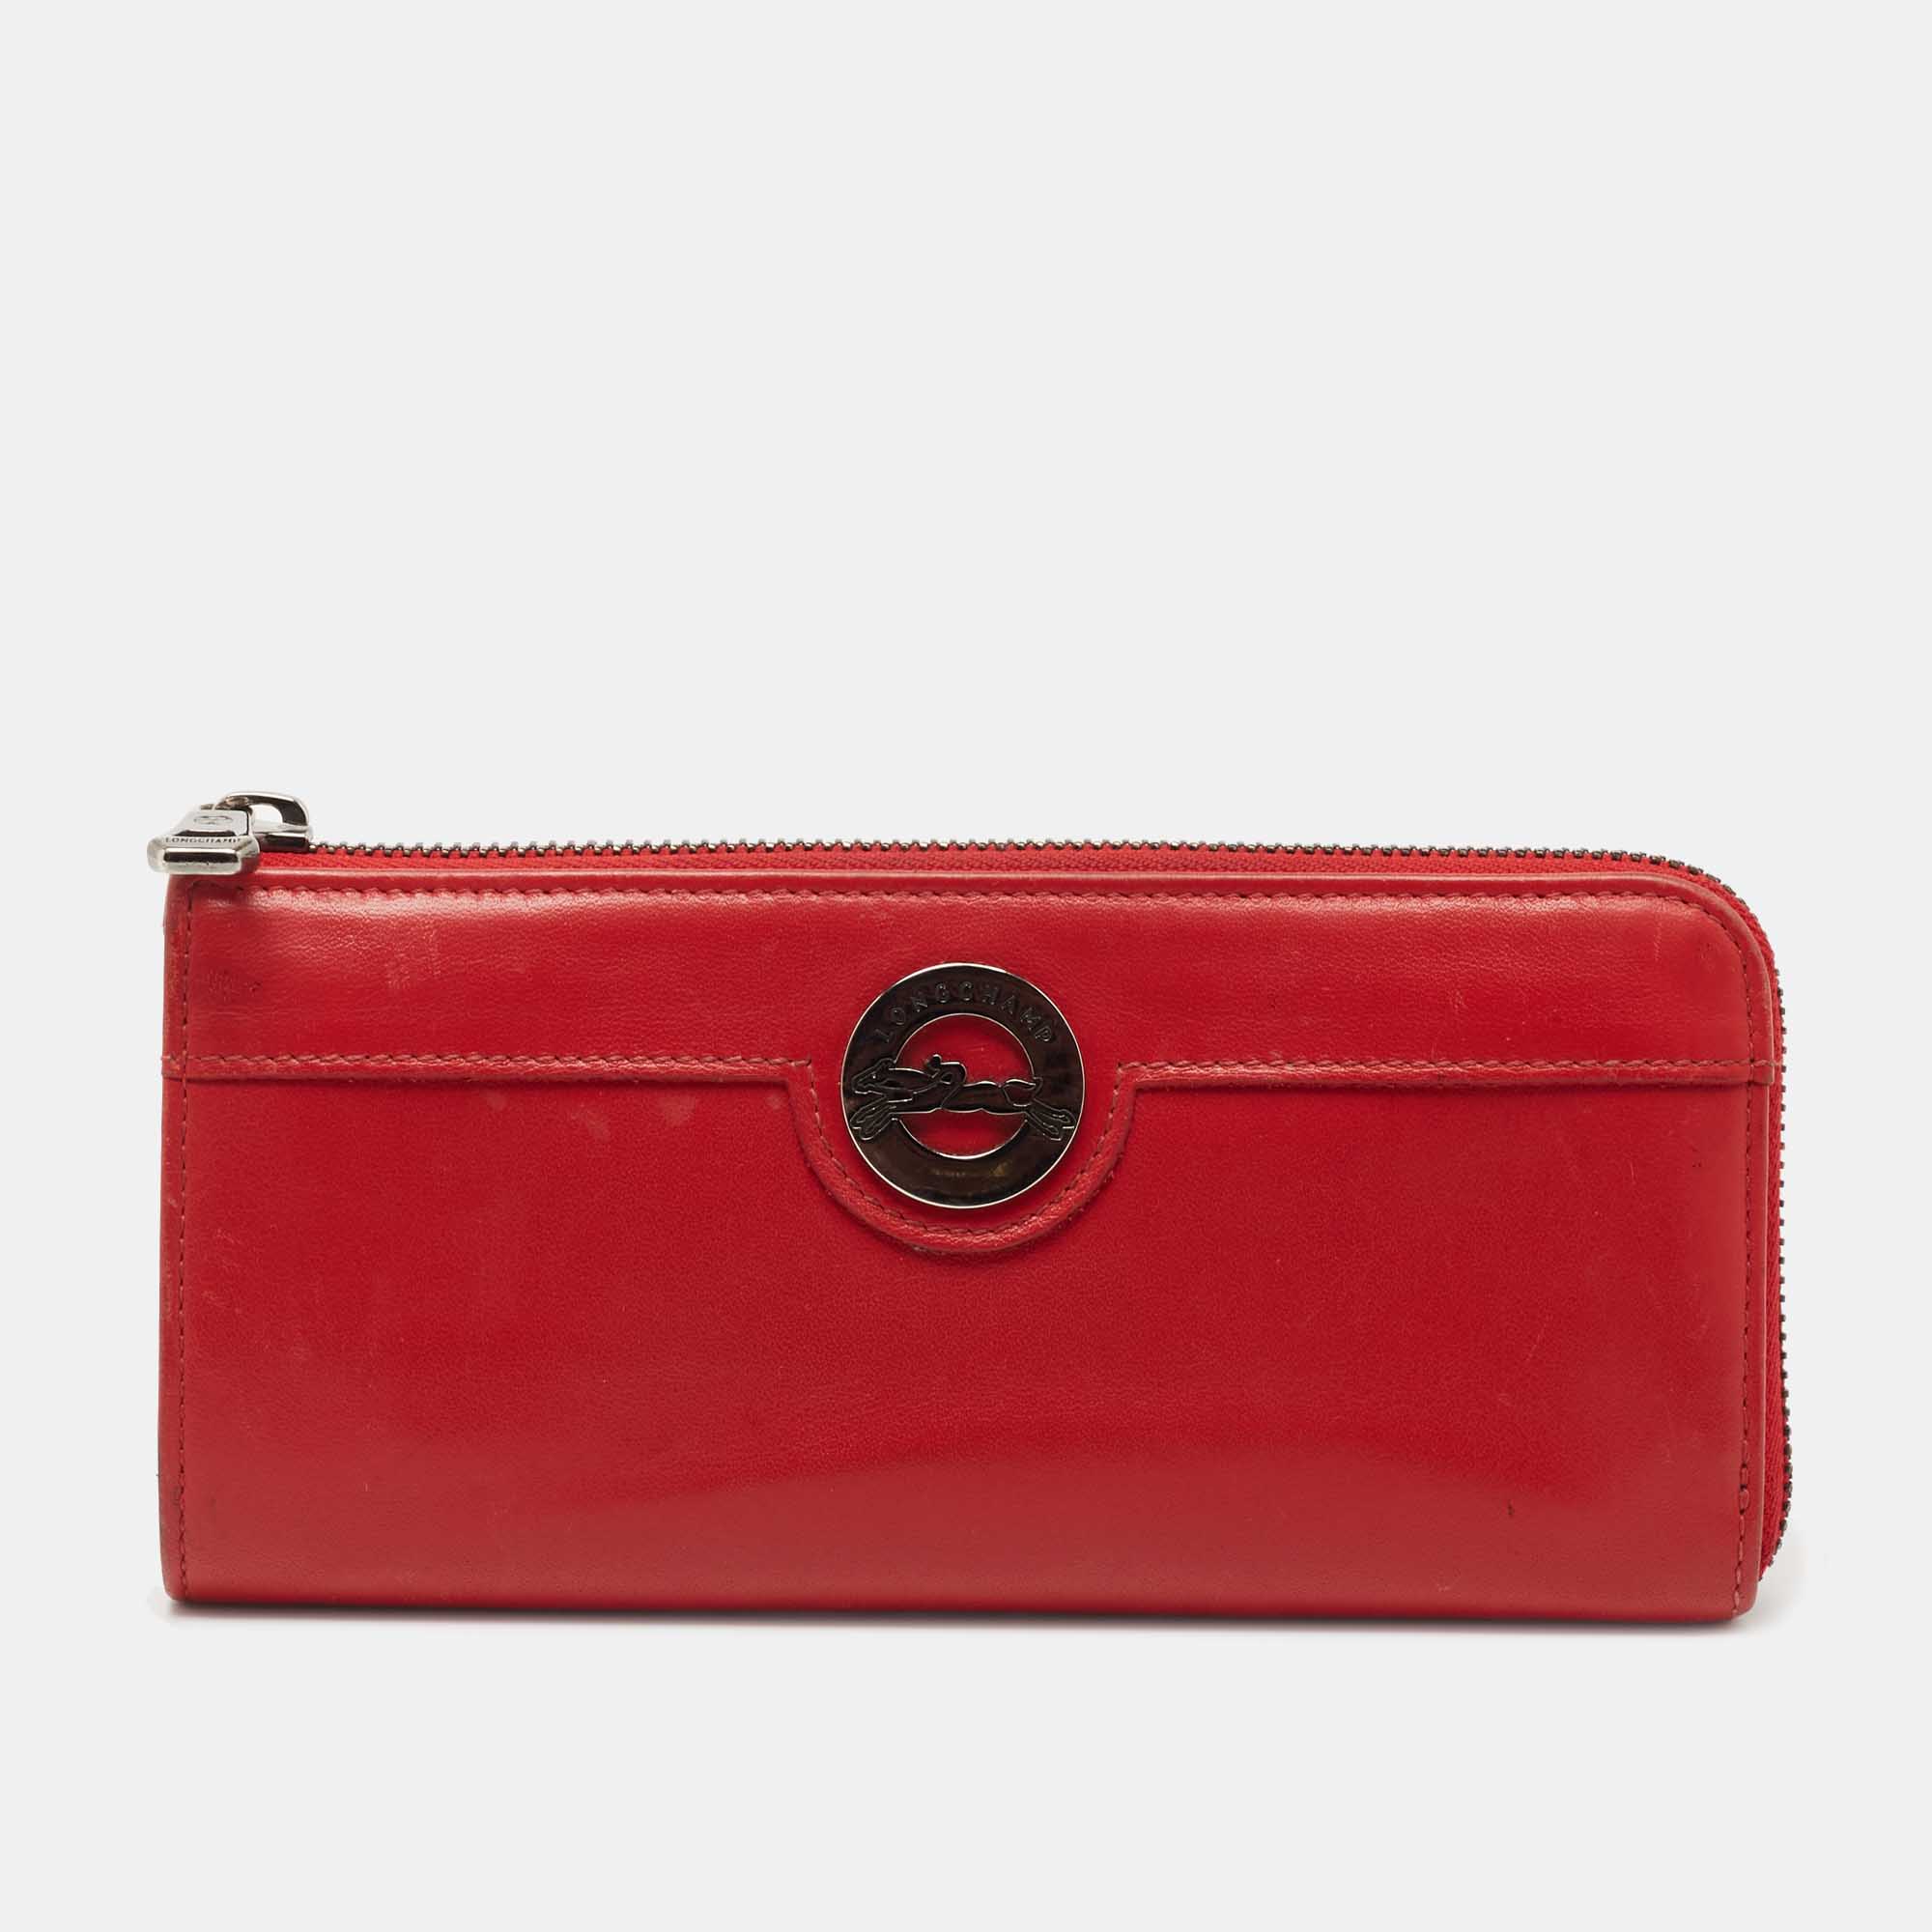 Pre-owned Longchamp Red Leather Zip Around Wallet